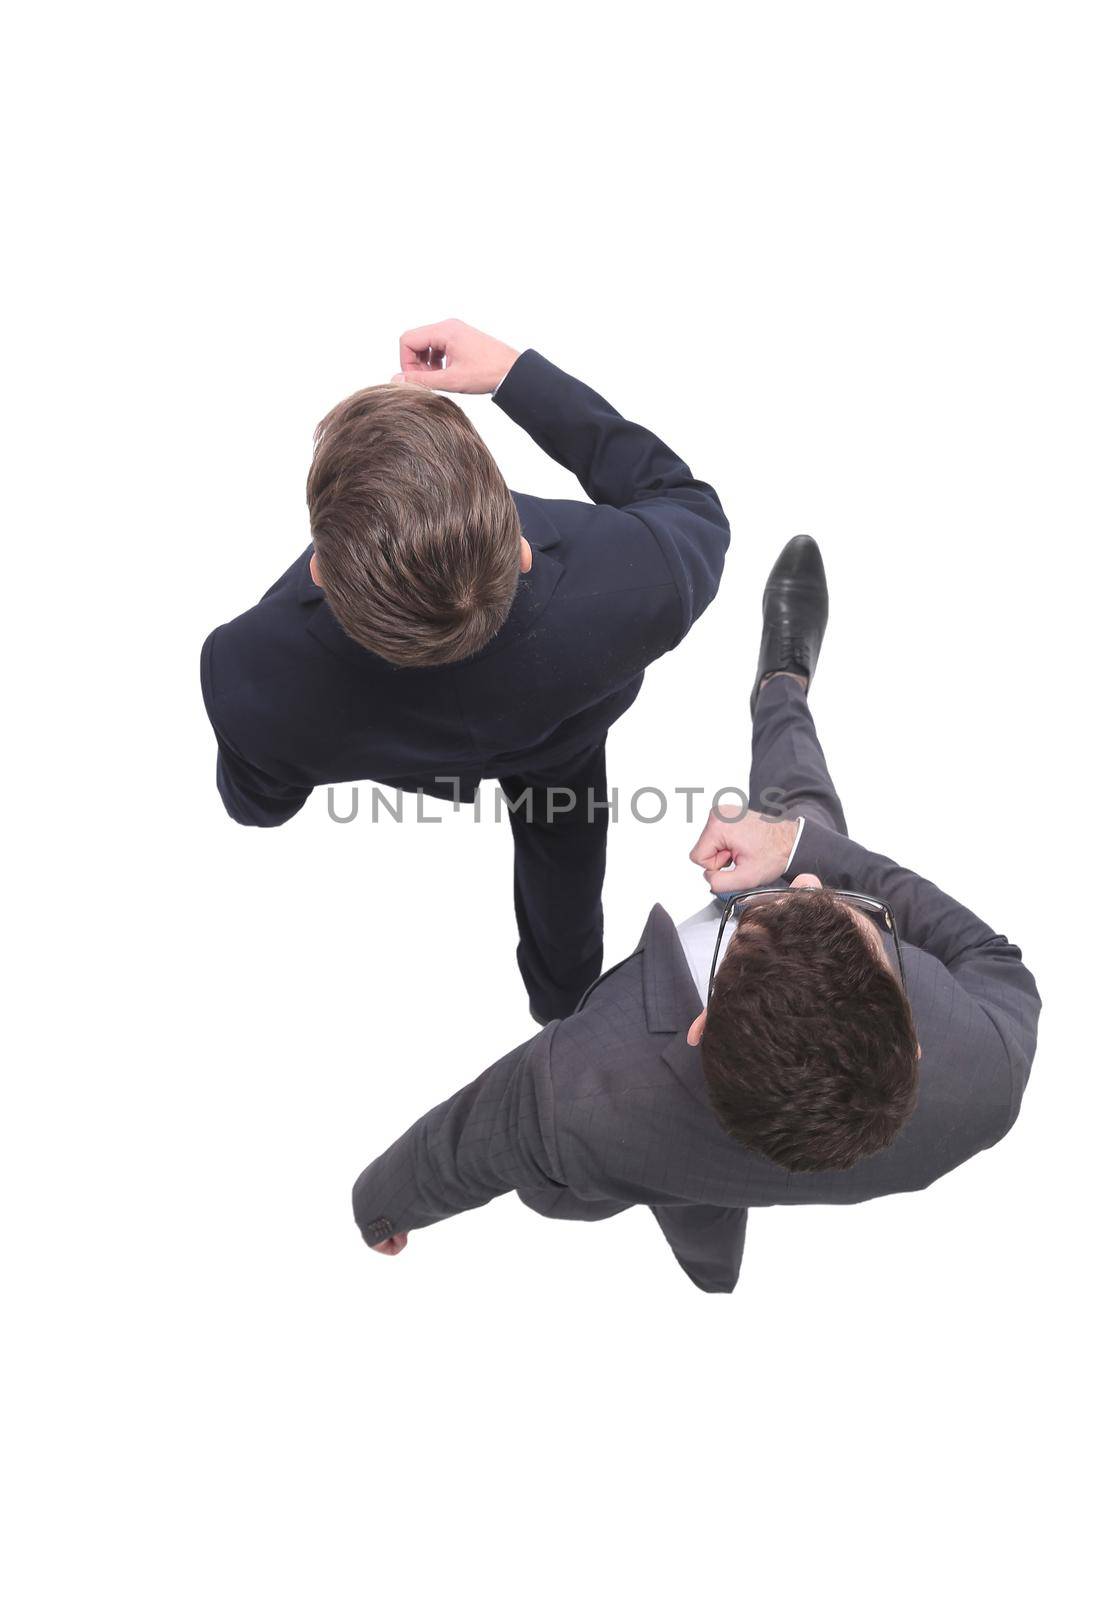 top view. two business people stepping forward. isolated on white background